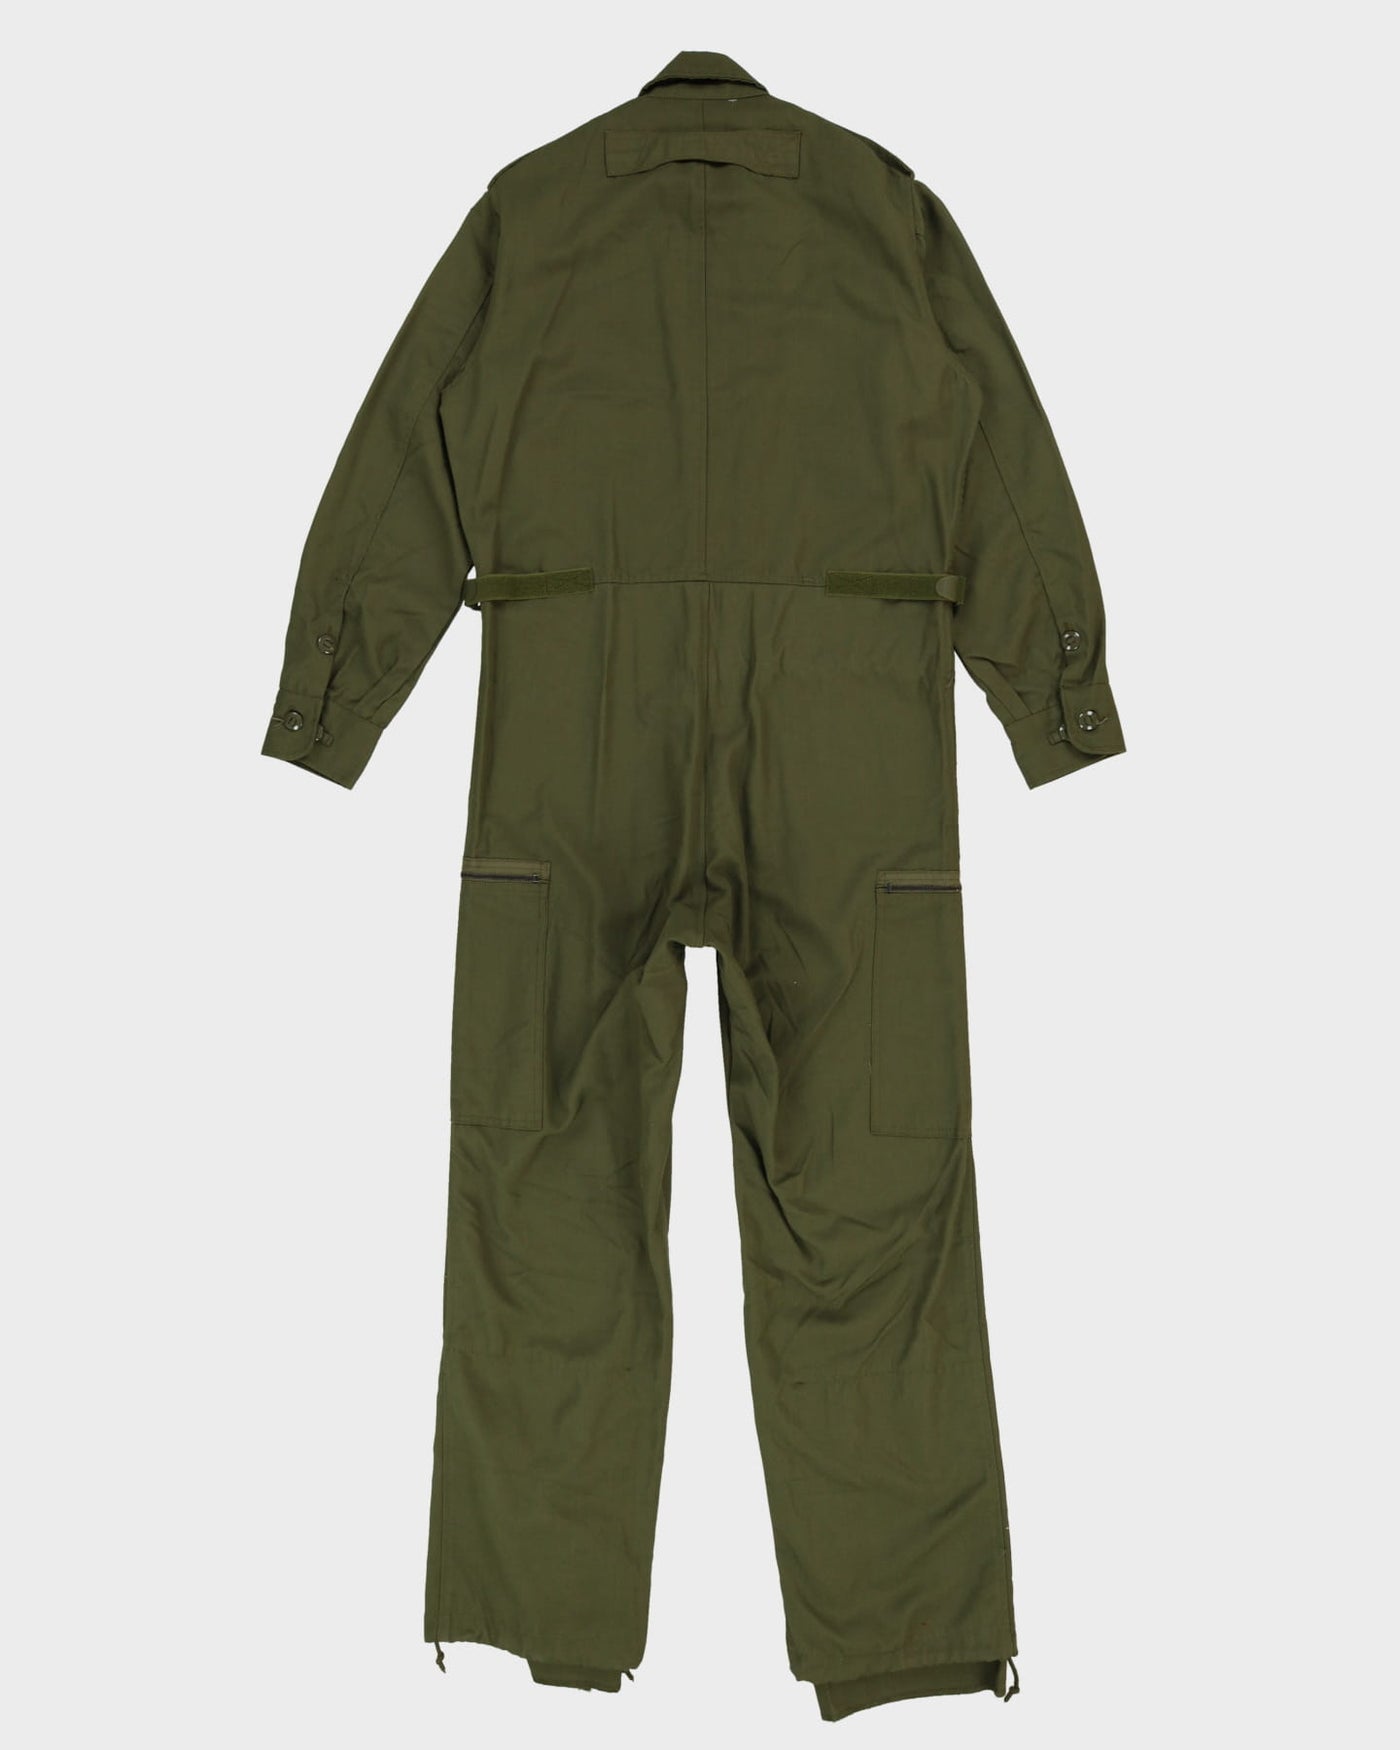 2010s Canadian Army CVC 'Tanker' Coveralls - X-Large